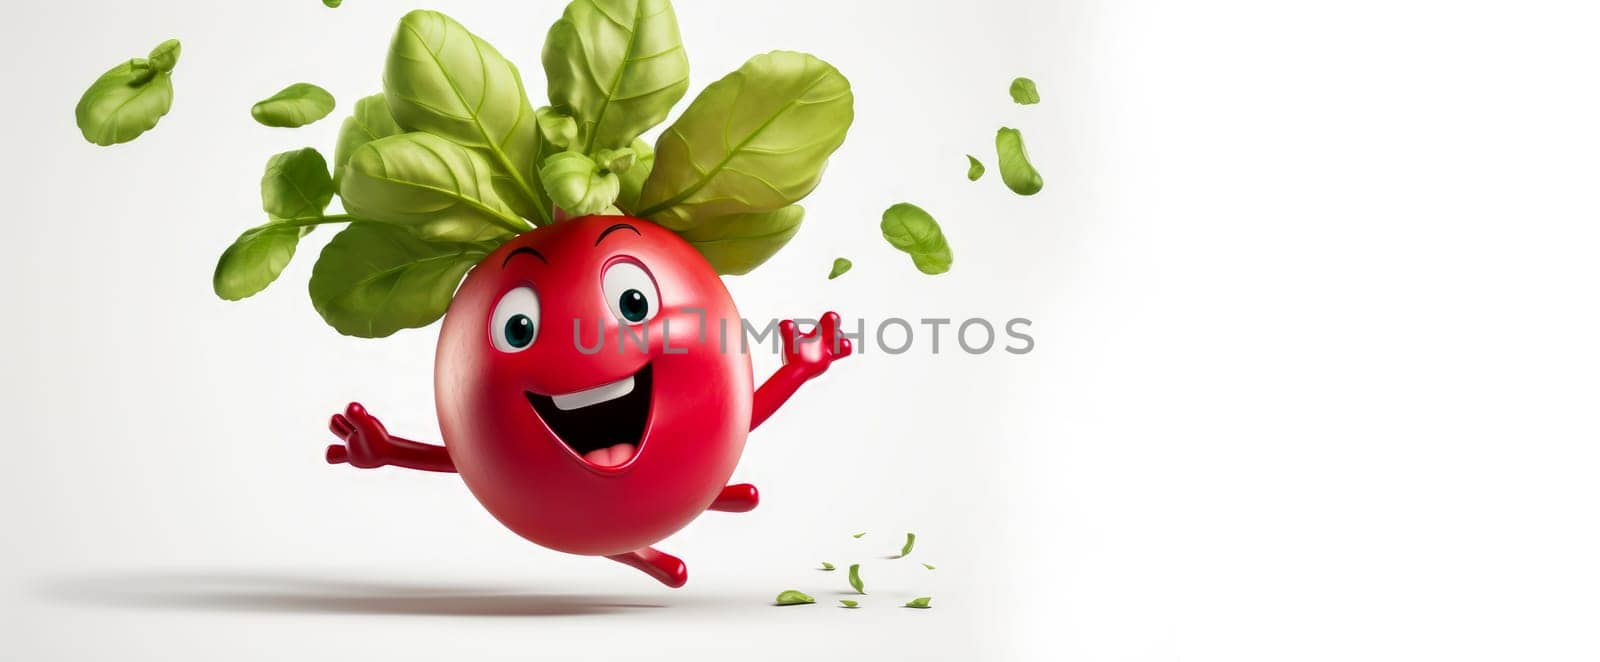 Radish with a cheerful face 3D on a white background. Cartoon characters, three-dimensional character, healthy lifestyle, proper nutrition, diet, fresh vegetables and fruits, vegetarianism, veganism, food, breakfast, fun, laughter, banner